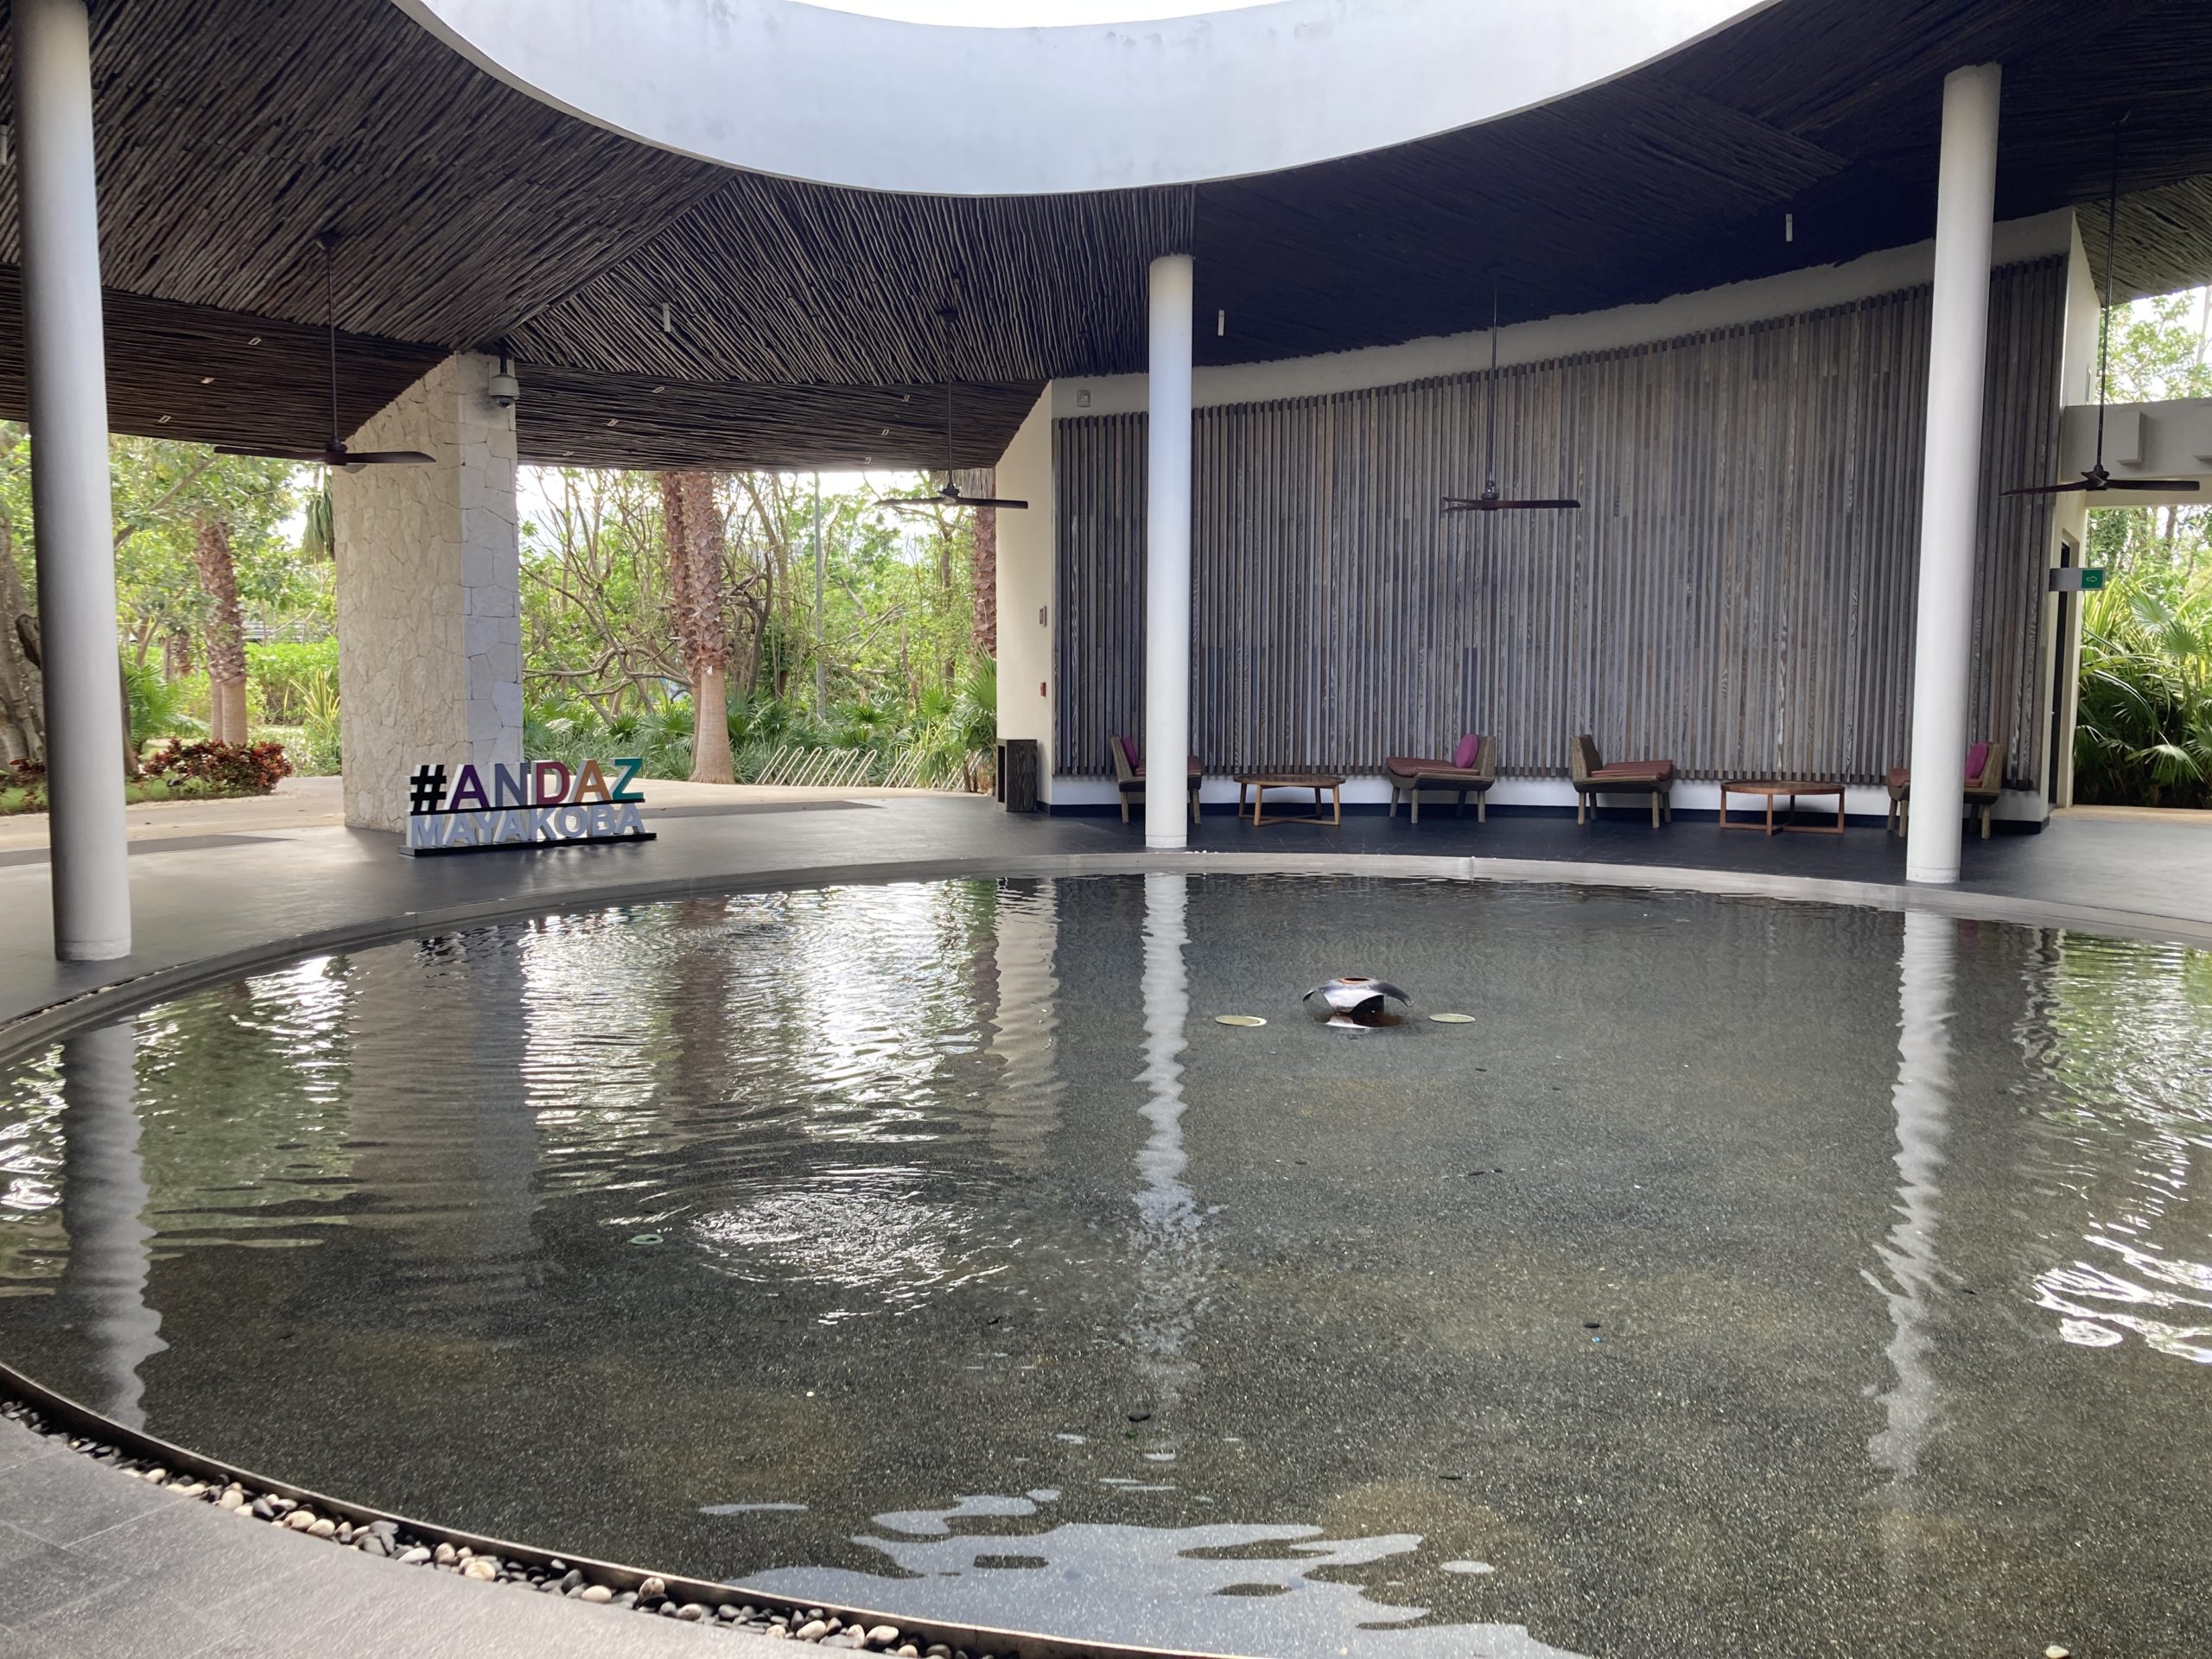 Andaz Mayakoba resort review - check-in started our visit on the right foot